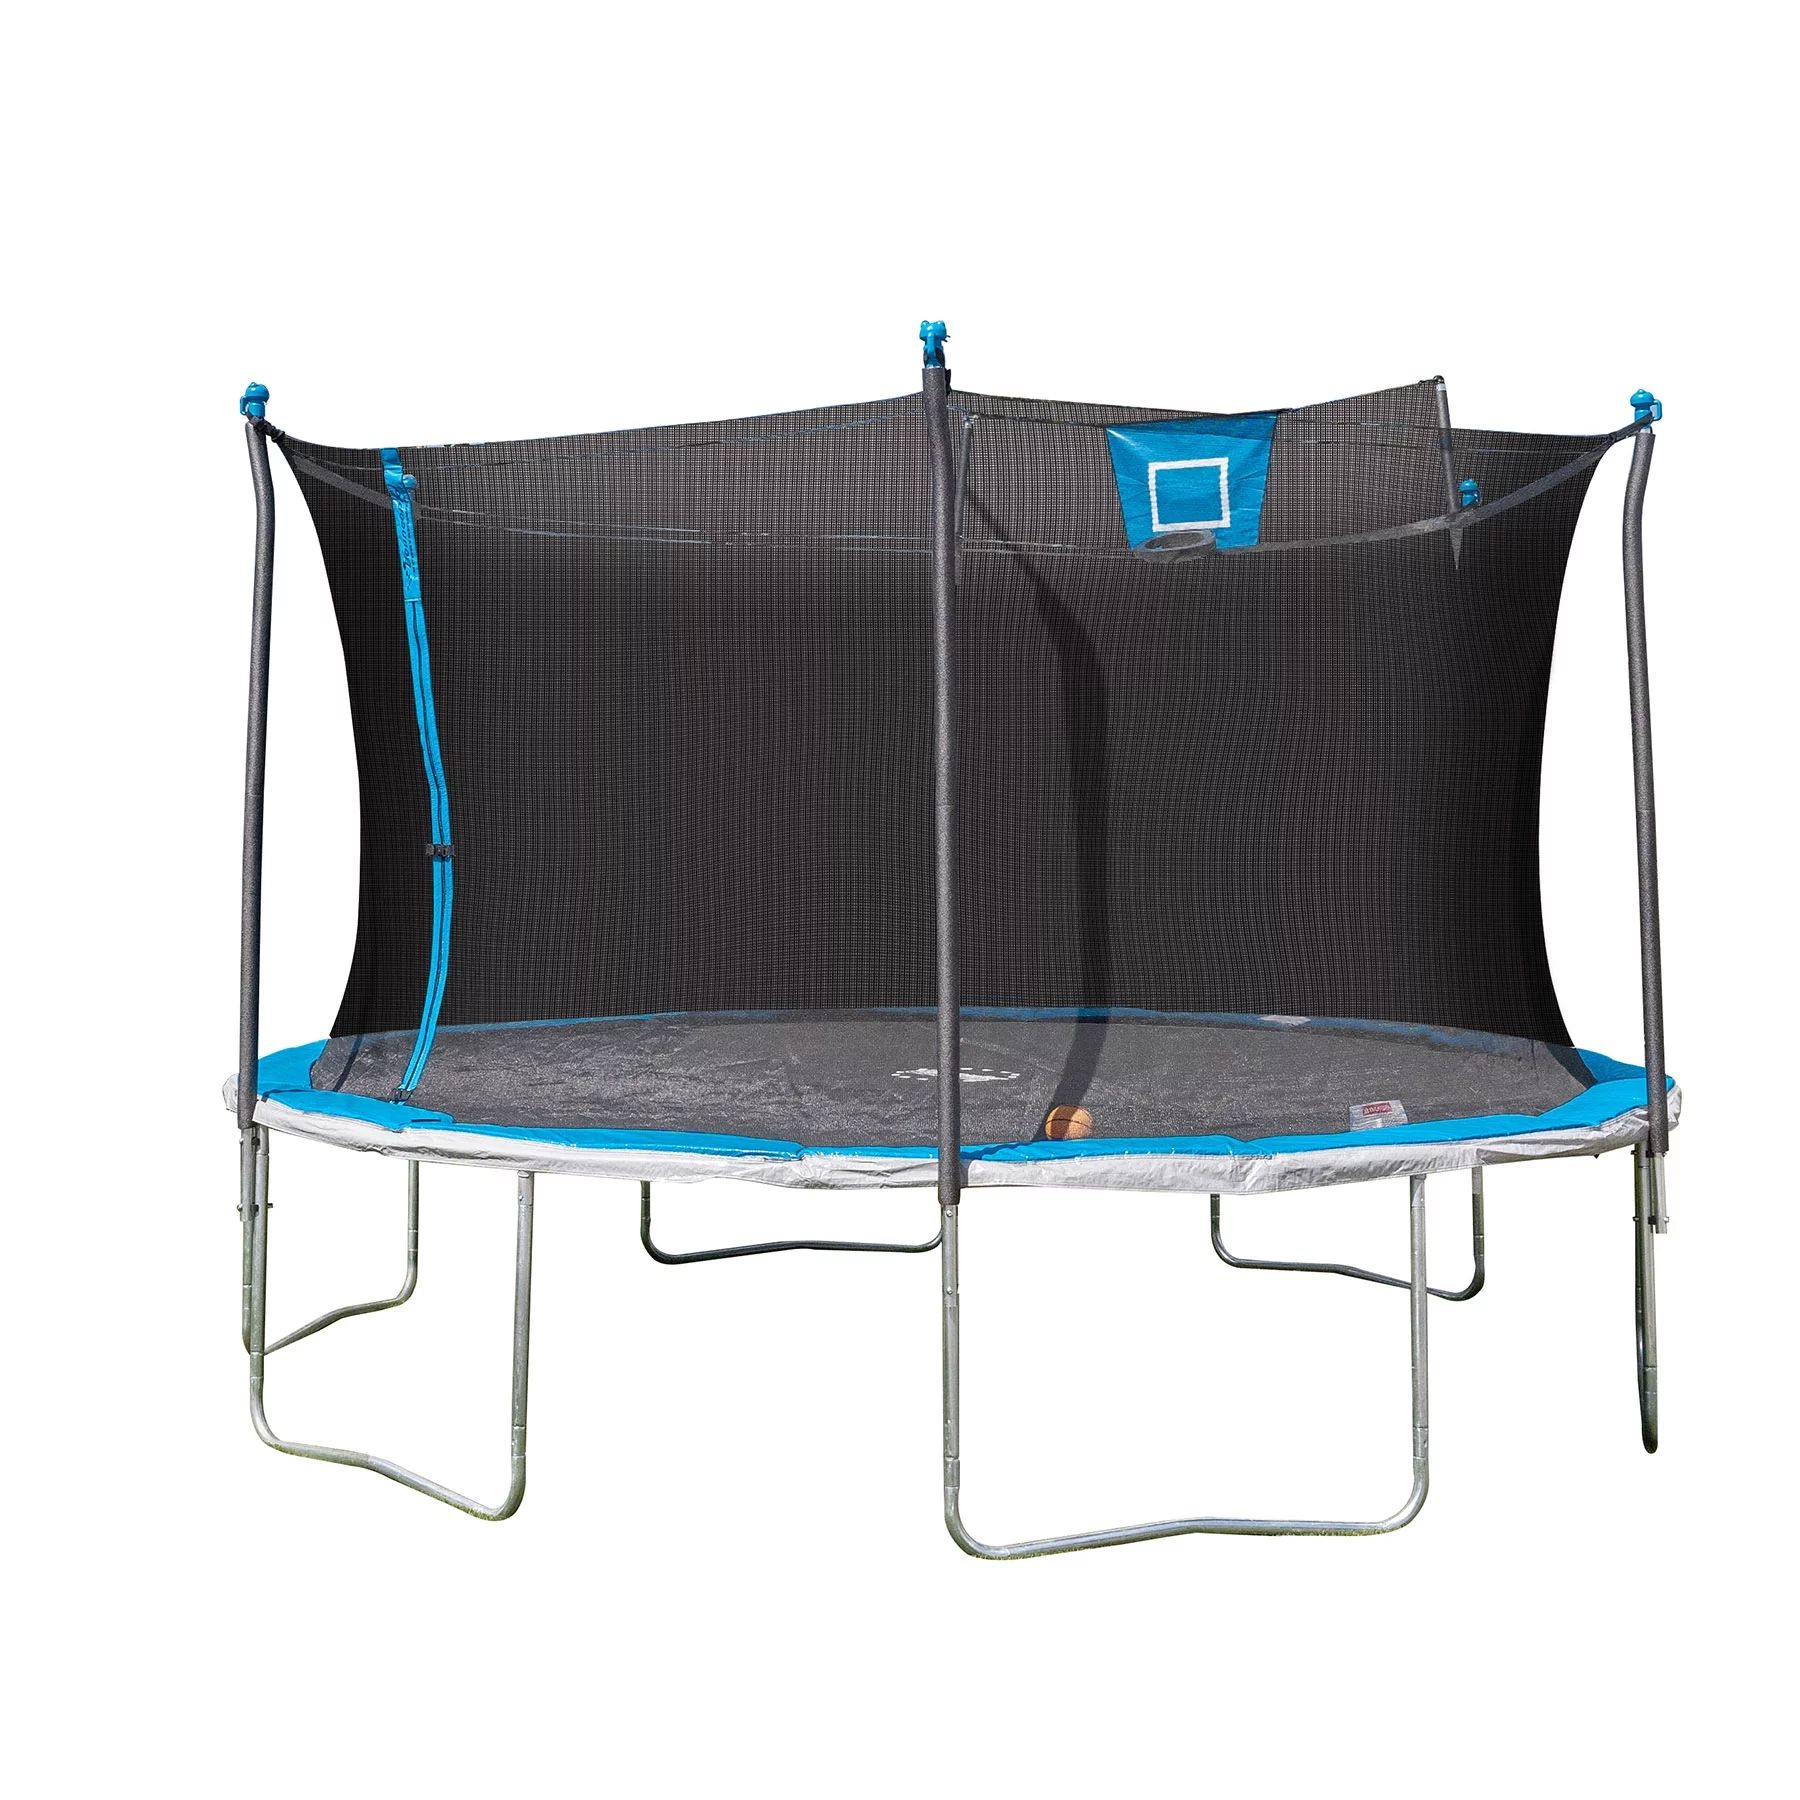 Bounce Pro 14ft Trampoline And Enclosure With Basketball Hoop, Blue | Walmart (US)